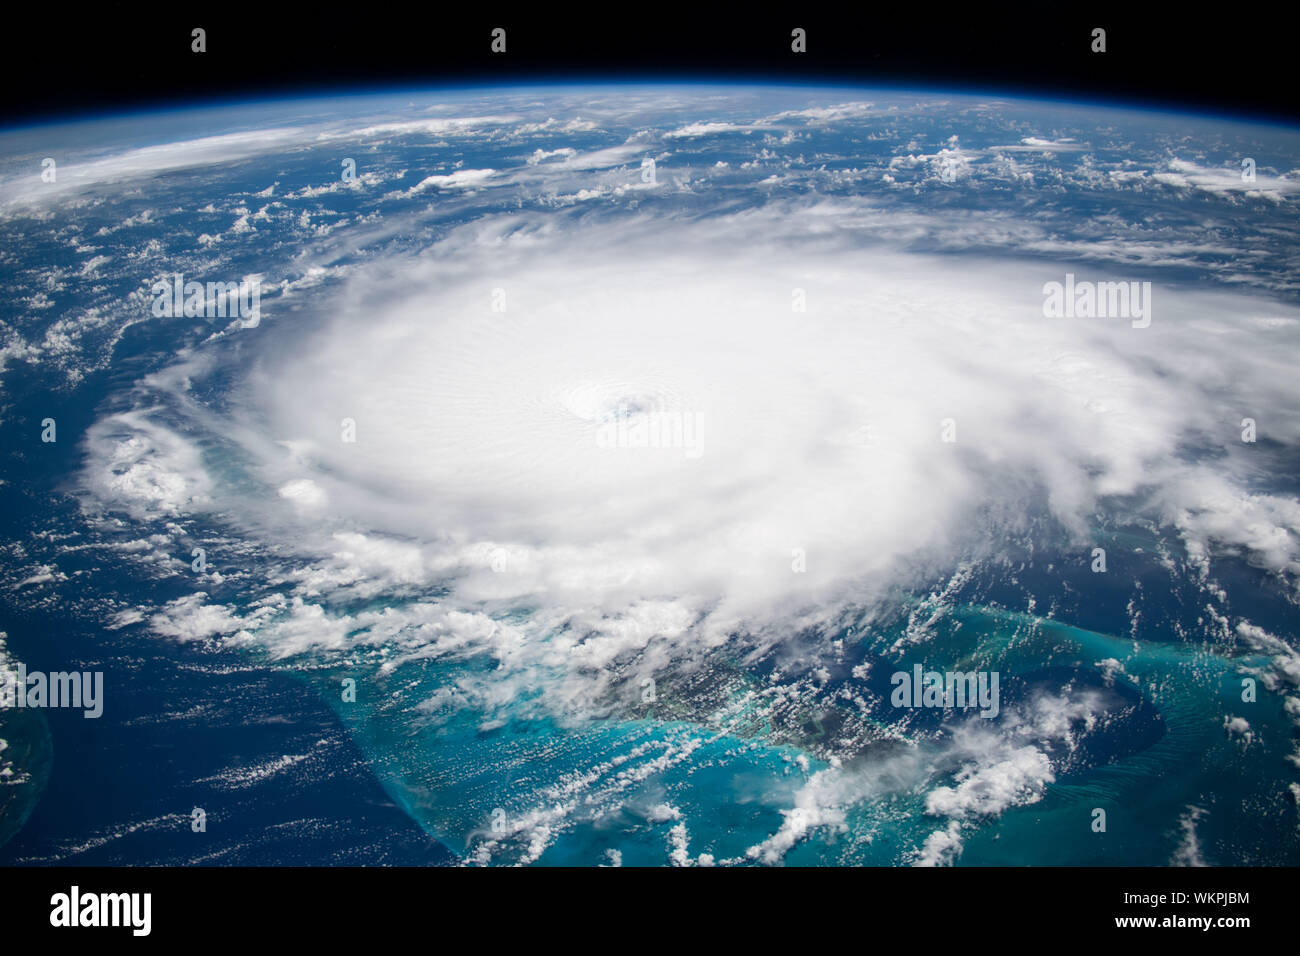 International Space Station. 01 September, 2019. Cyclonic clouds of Hurricane Dorian seen from the International Space Station as it stalls over the Bahamas September 1, 2019 in the Atlantic Ocean. The current forecast calls for Dorian to strengthen over open water to a Category 4 with winds of 140 mph before making landfall in South Florida late Monday.  Credit: NASA/Planetpix/Alamy Live News Stock Photo